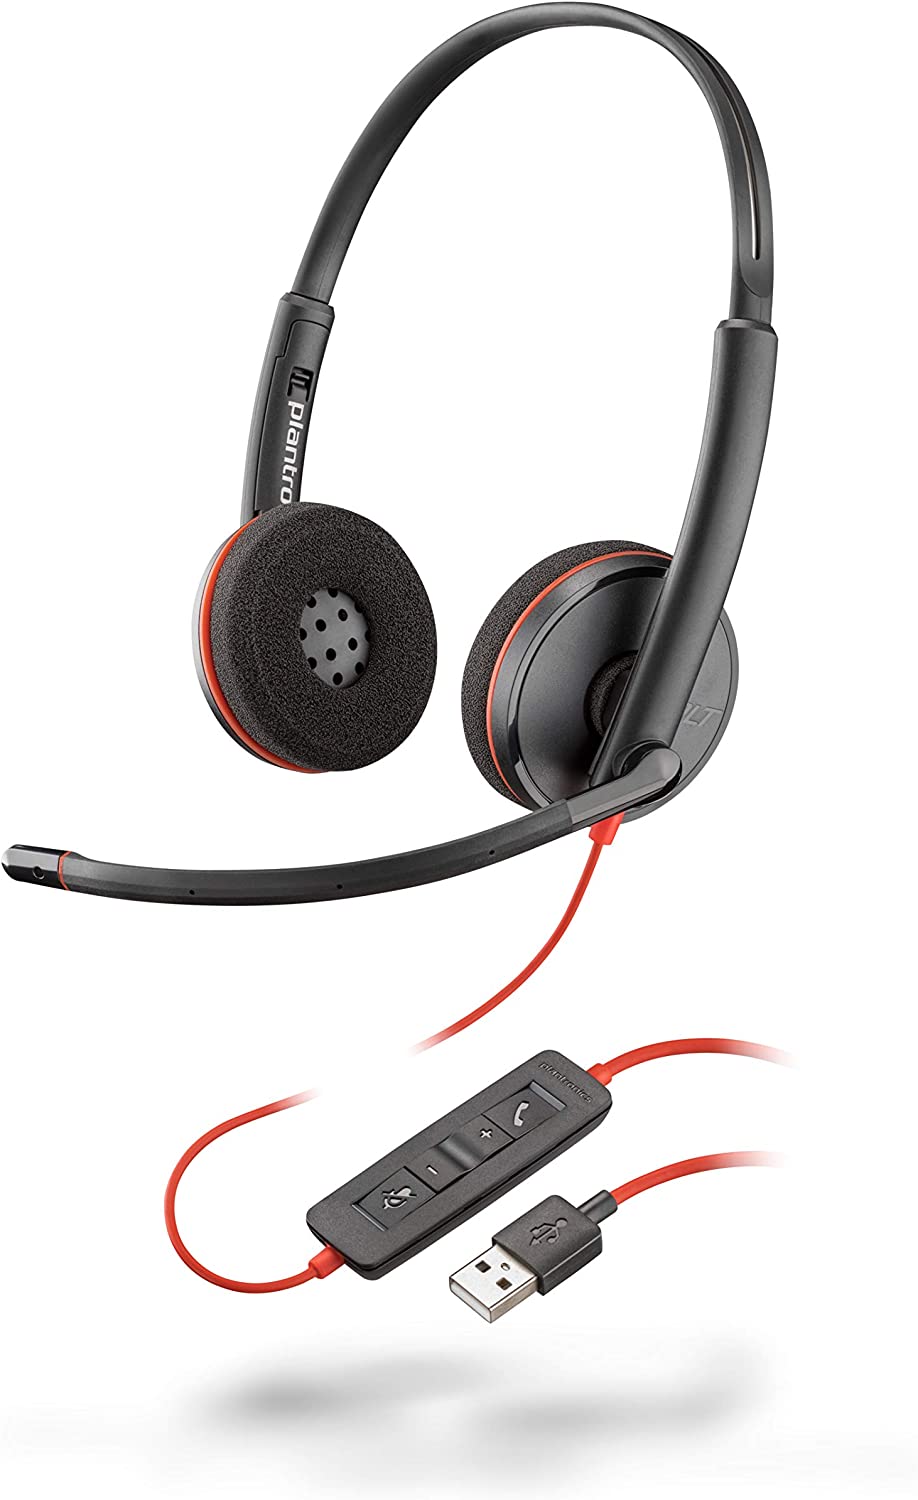 Poly Plantronics - Blackwire 3220 - Wired Dual-Ear (Stereo) Headset with Boom Mic - USB-A to connect to your PC and/or Mac